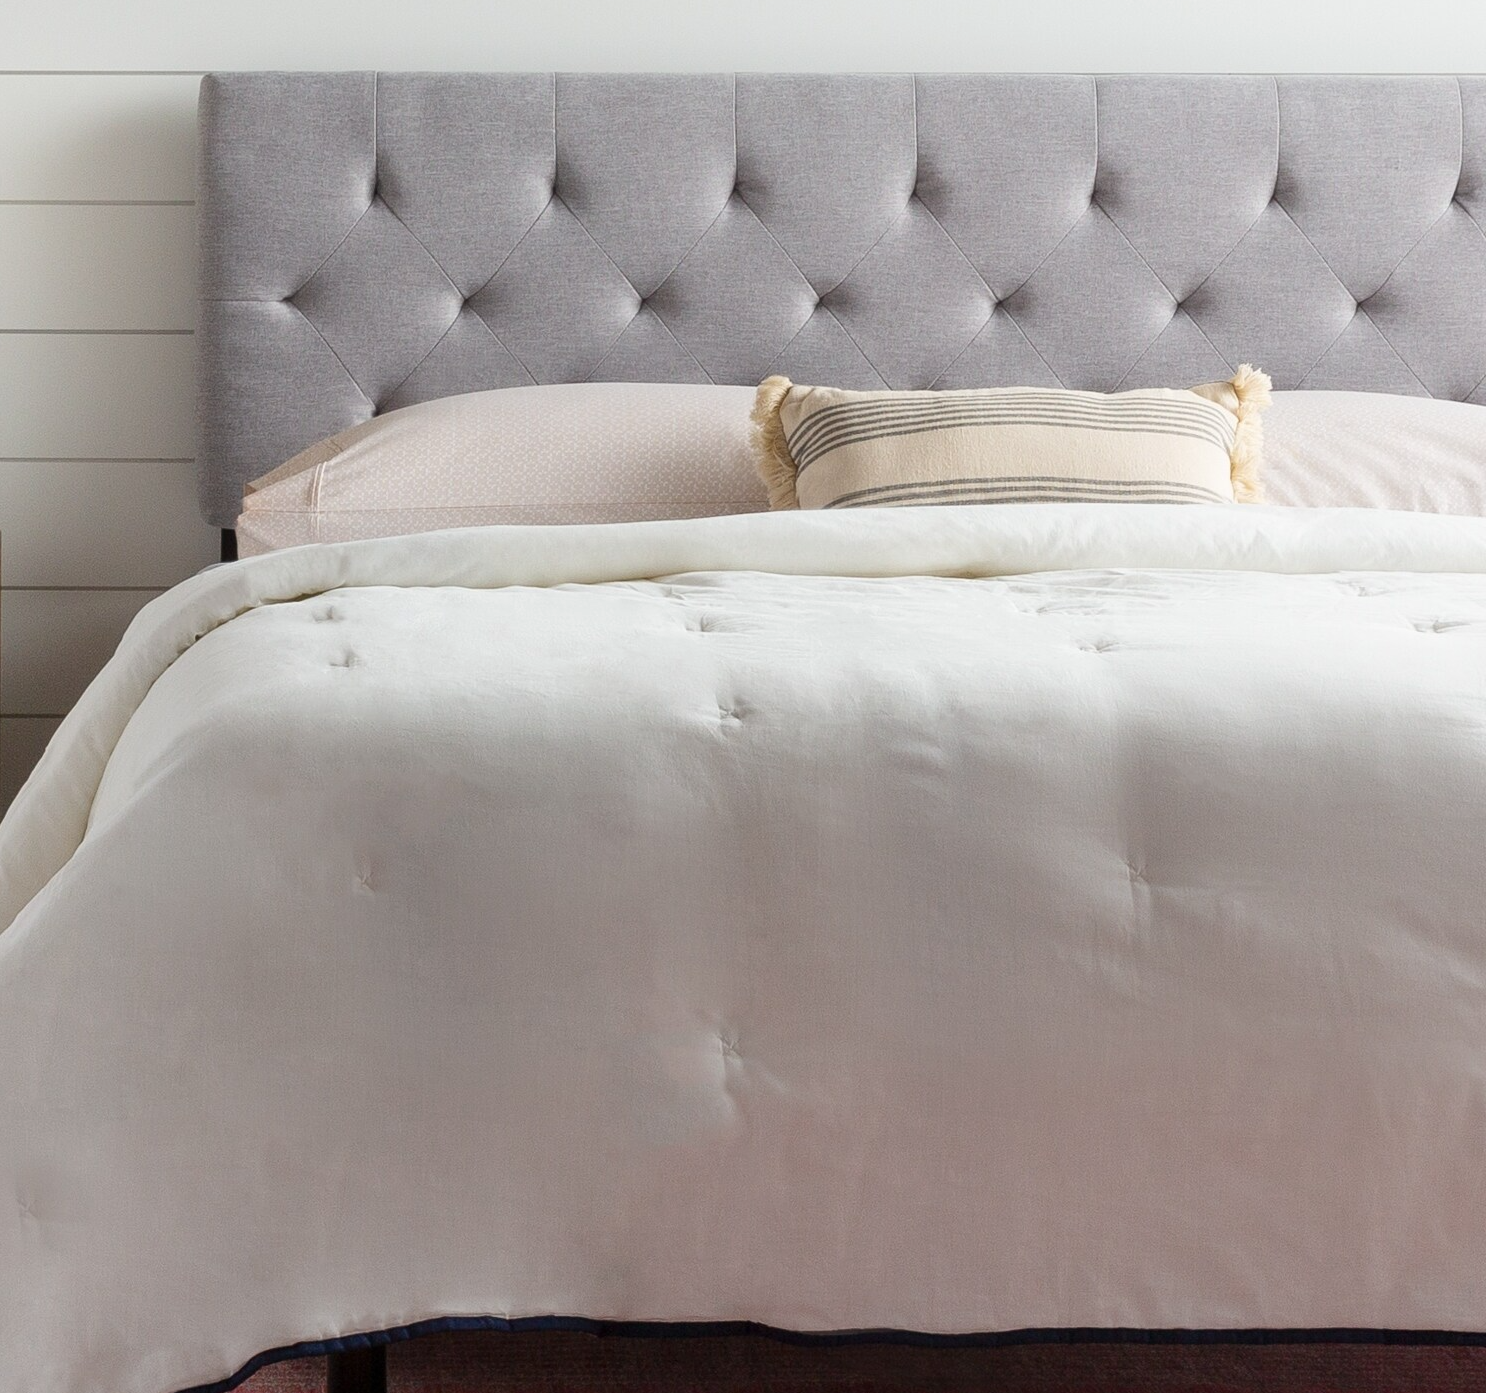 A headboard on top of a bed.